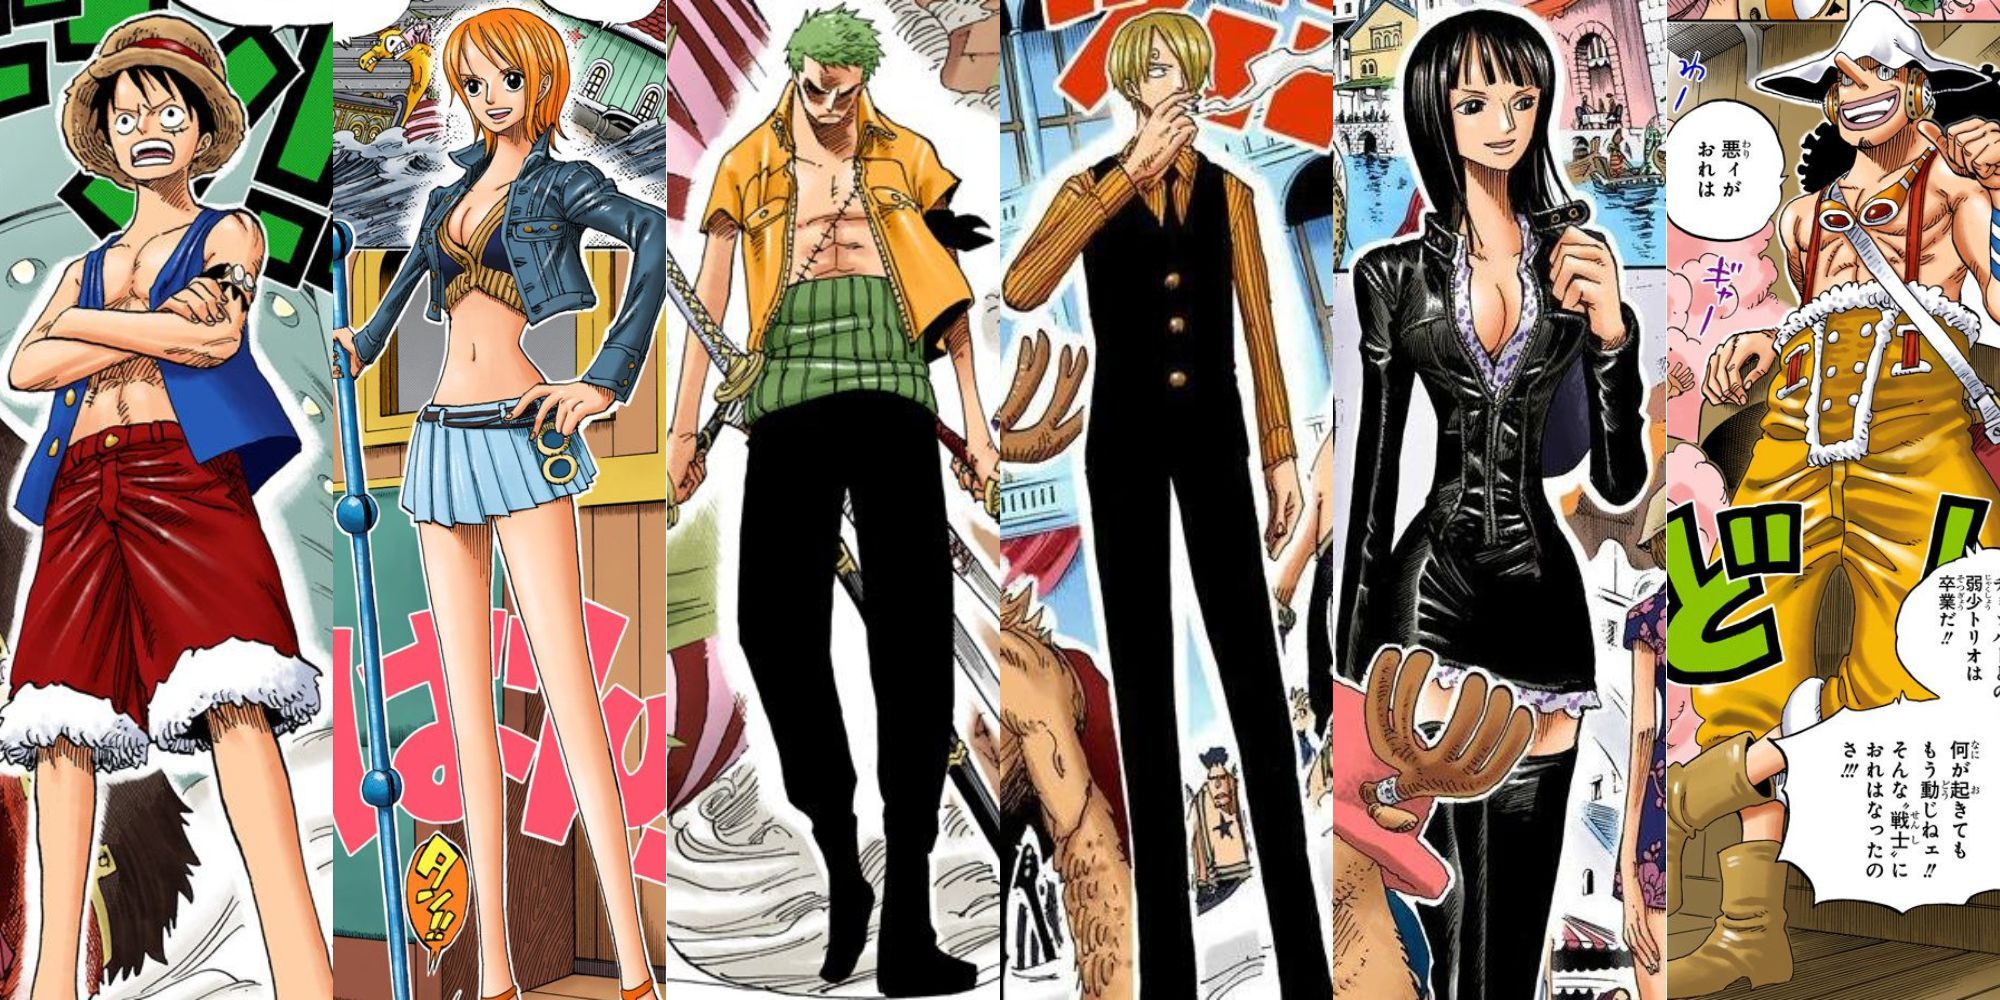 A piece of straw hat pirates wearing different clothes